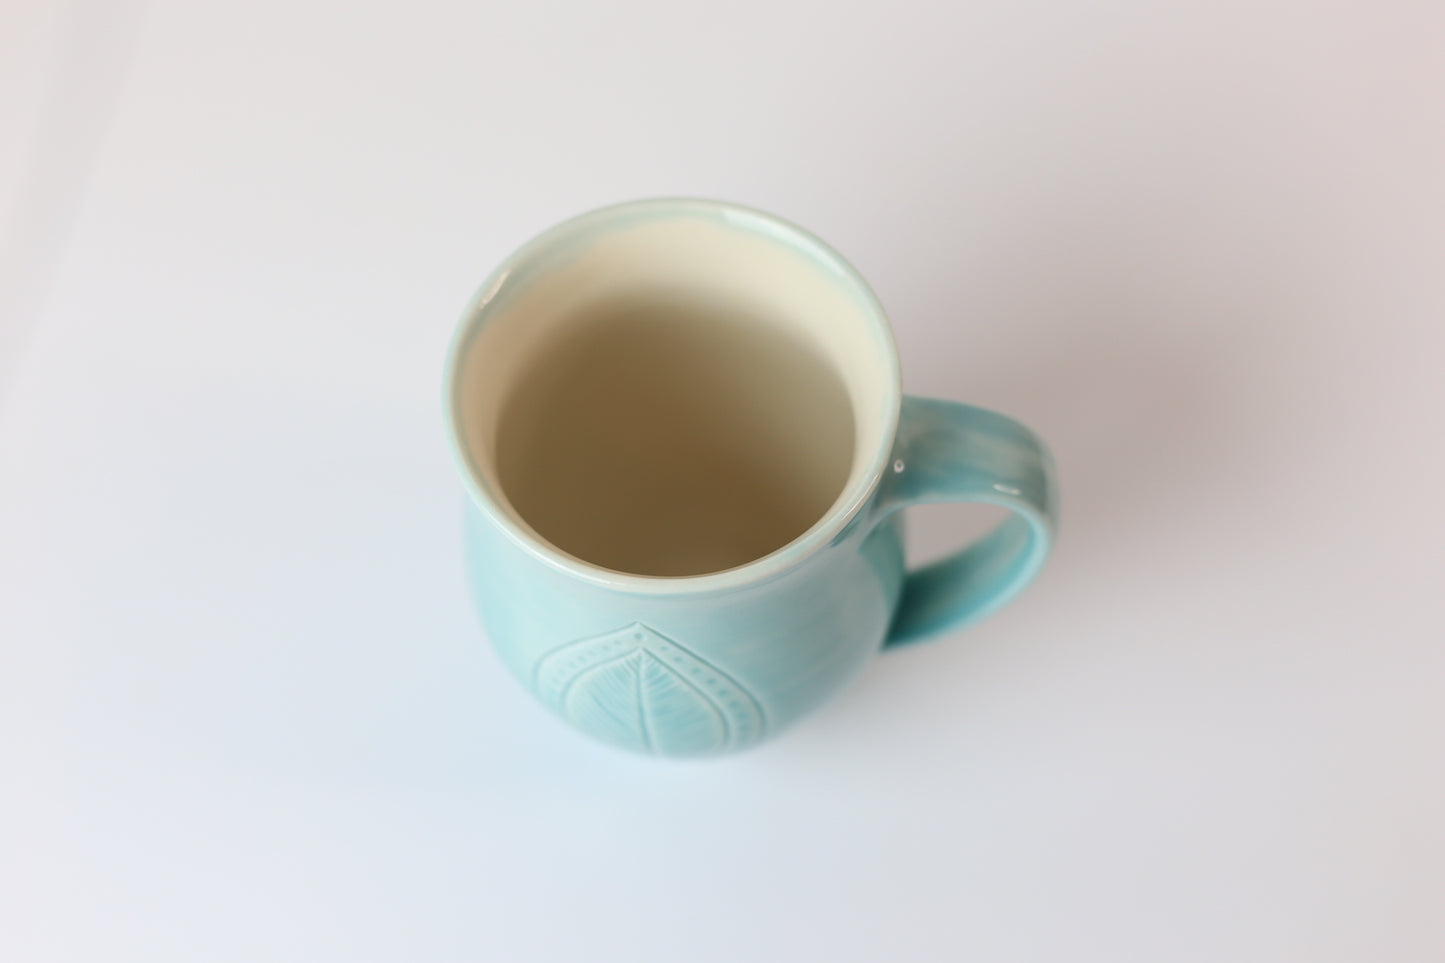 12oz porcelain mug with feather leaf design in turquoise